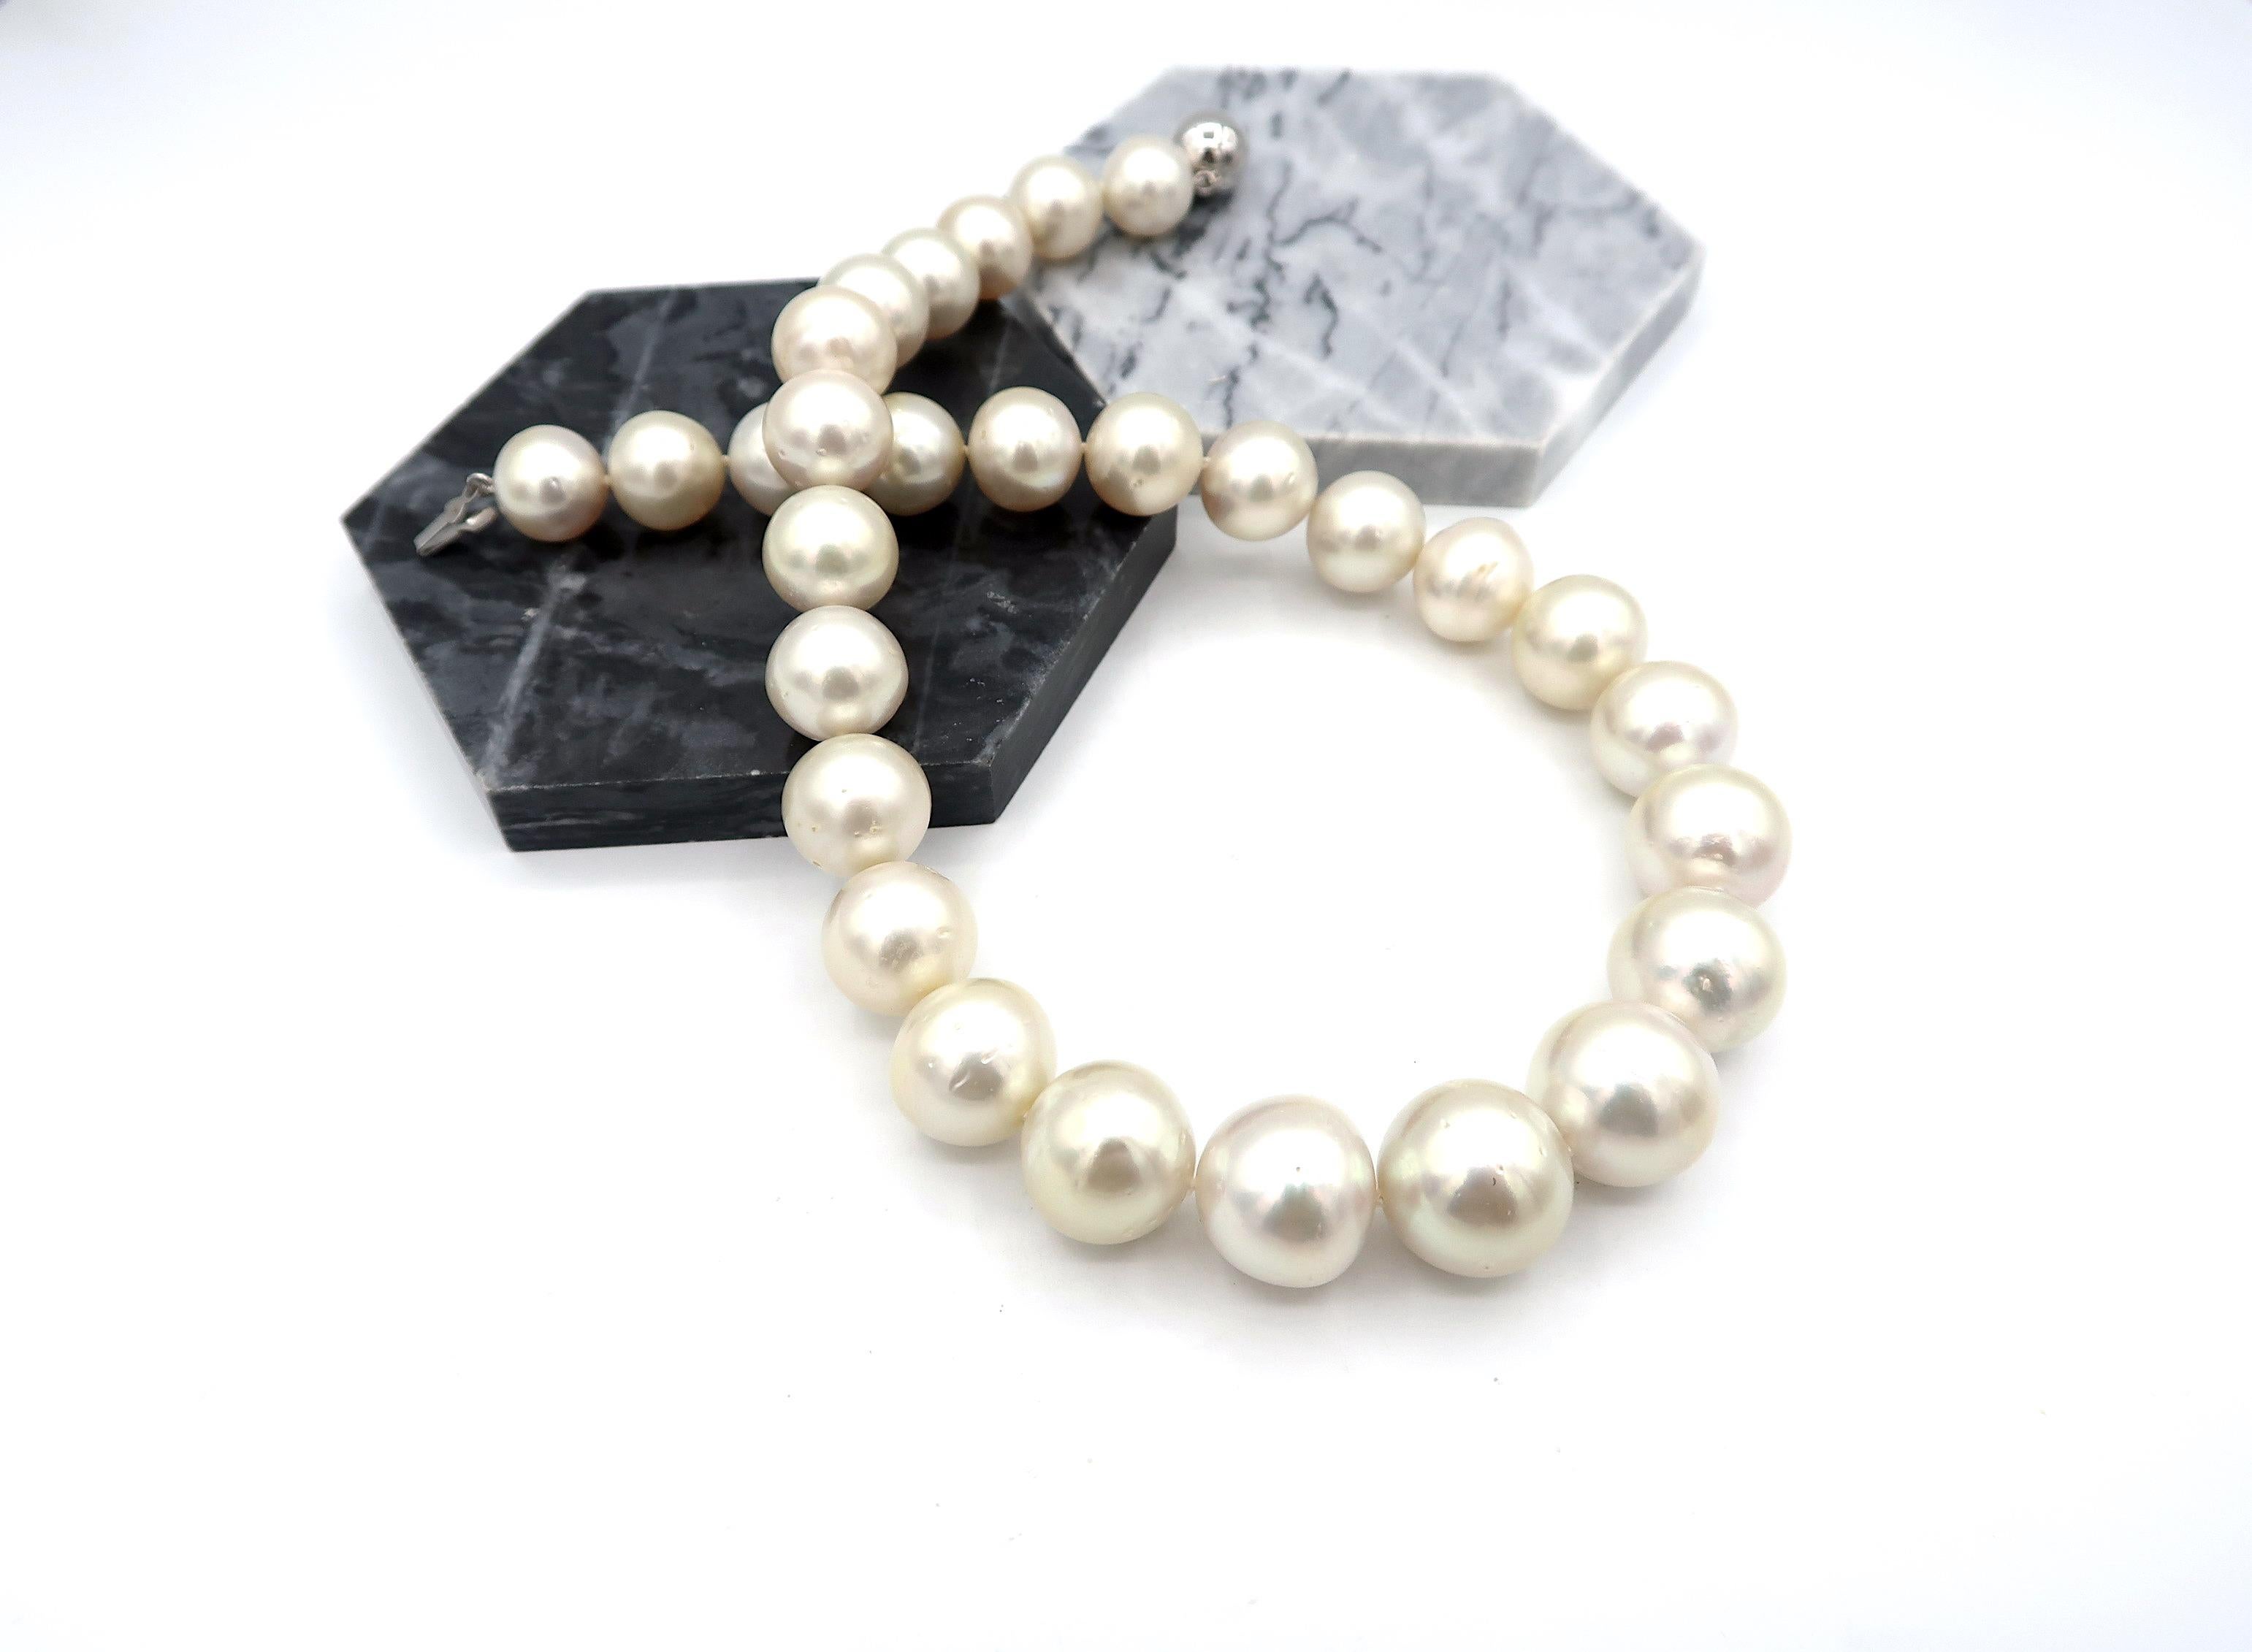 17.5 Inch Long 16.8-13.1mm Cream South Sea Pearl Necklace with Silver Ball Clasp